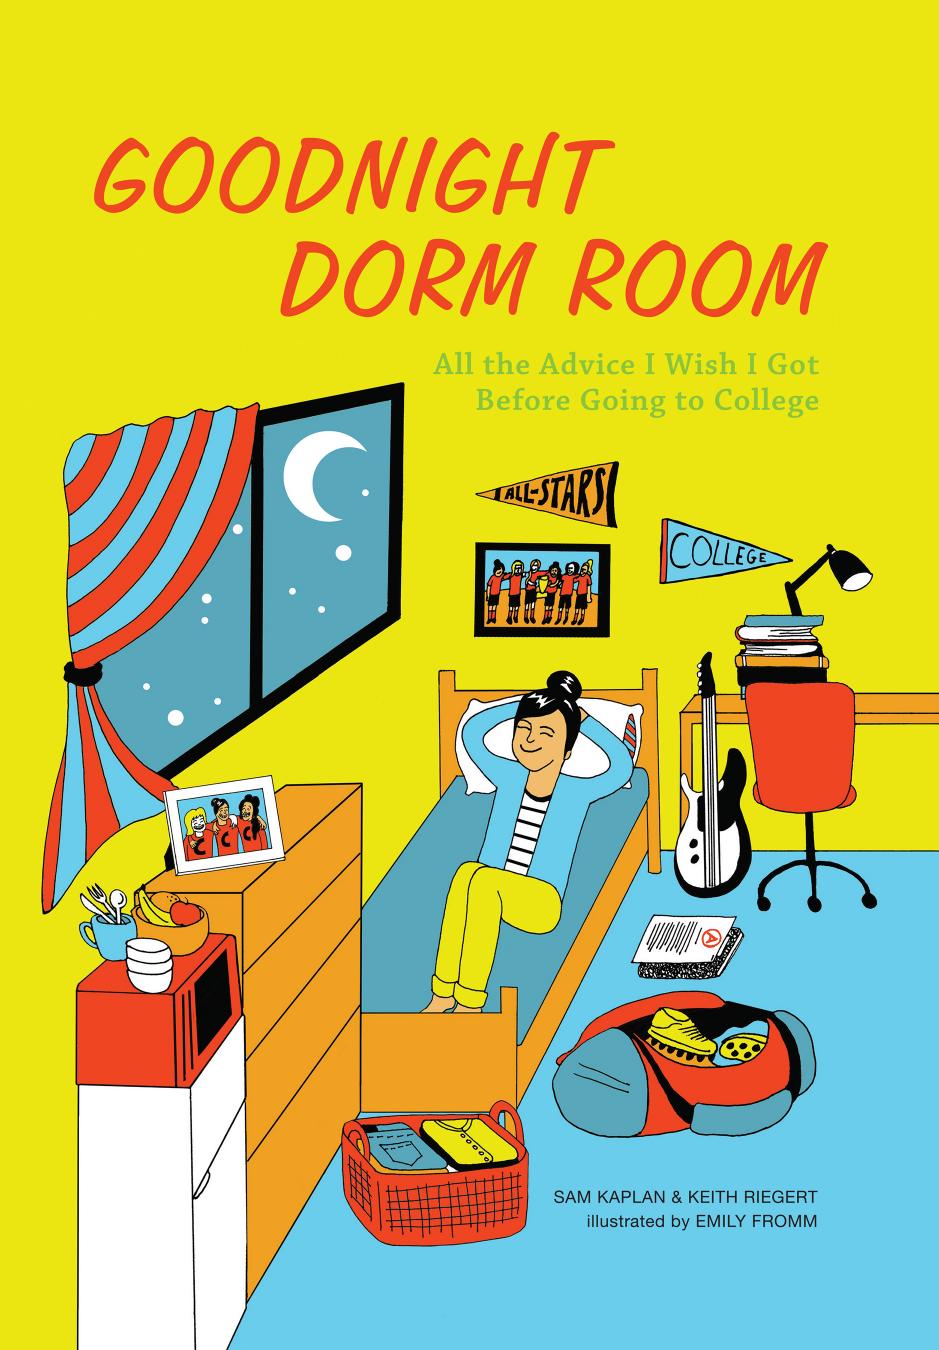 Goodnight Dorm Room by Sam Kaplan & Keith Riegert & Emily Fromm